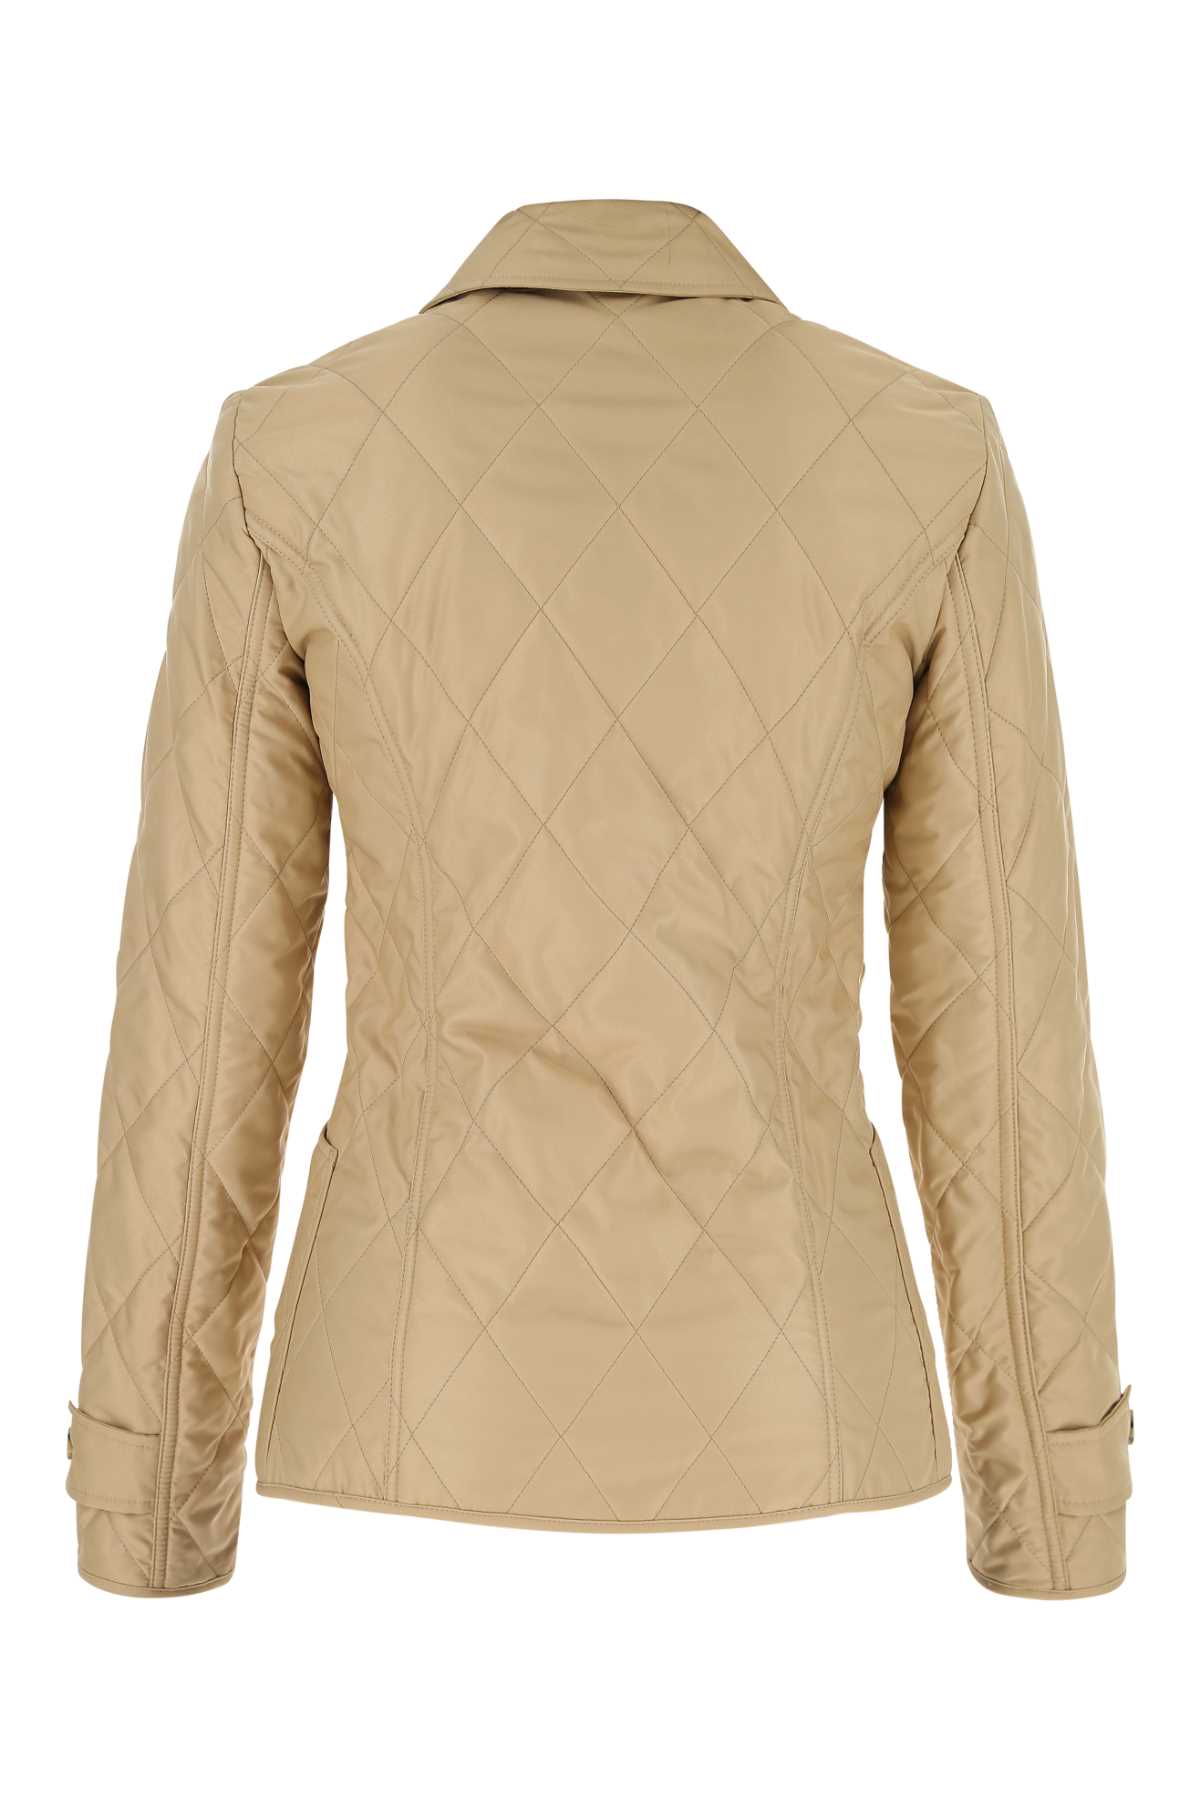 Burberry Beige Polyester Jacket In A4170